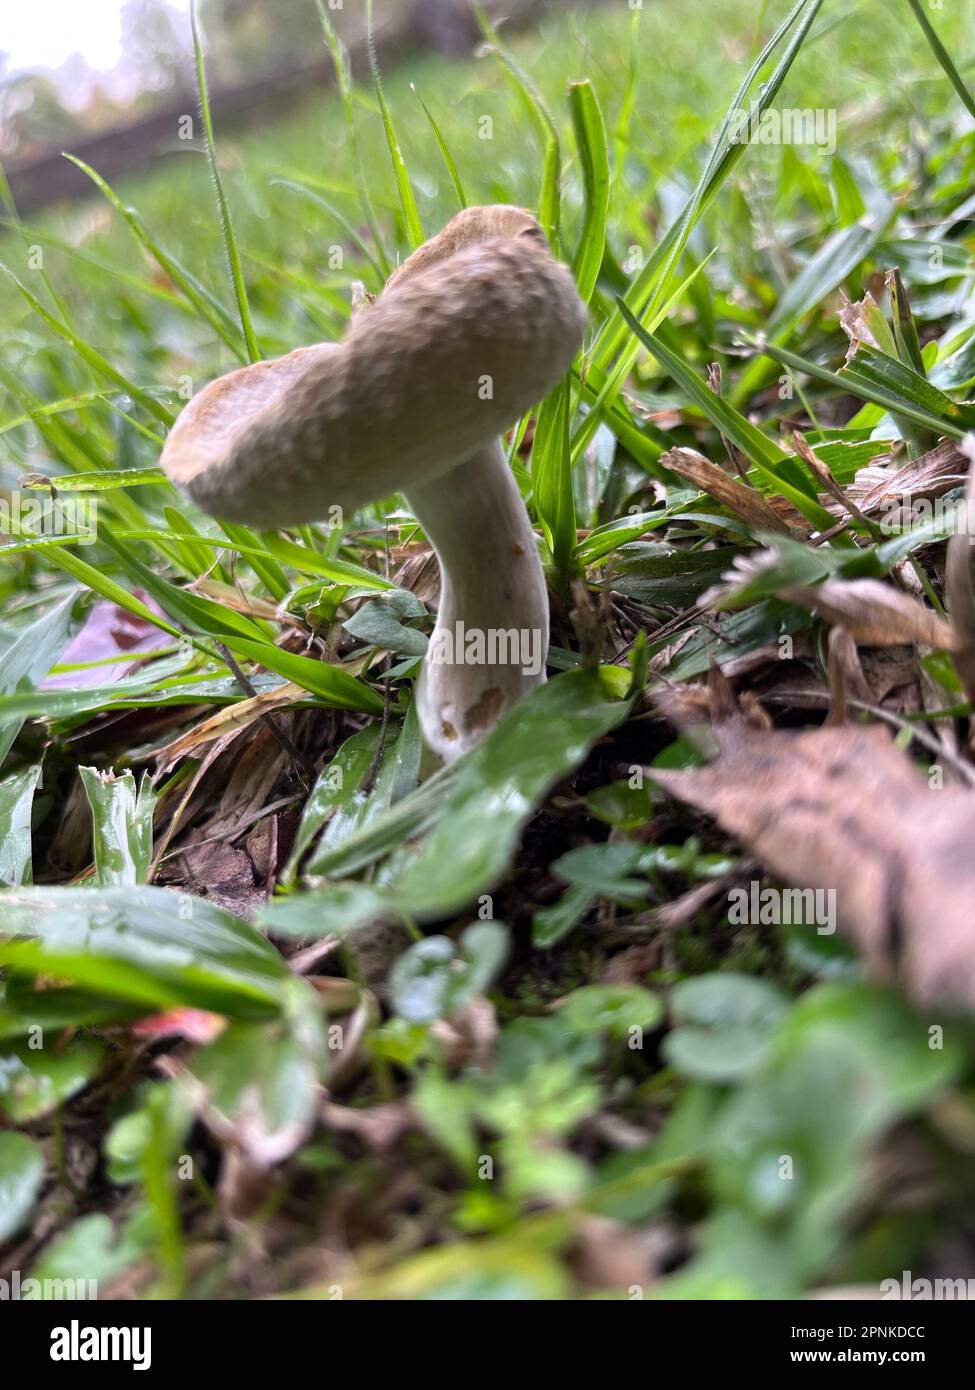 Photo of a poisonous mushroom in the garden Stock Photo